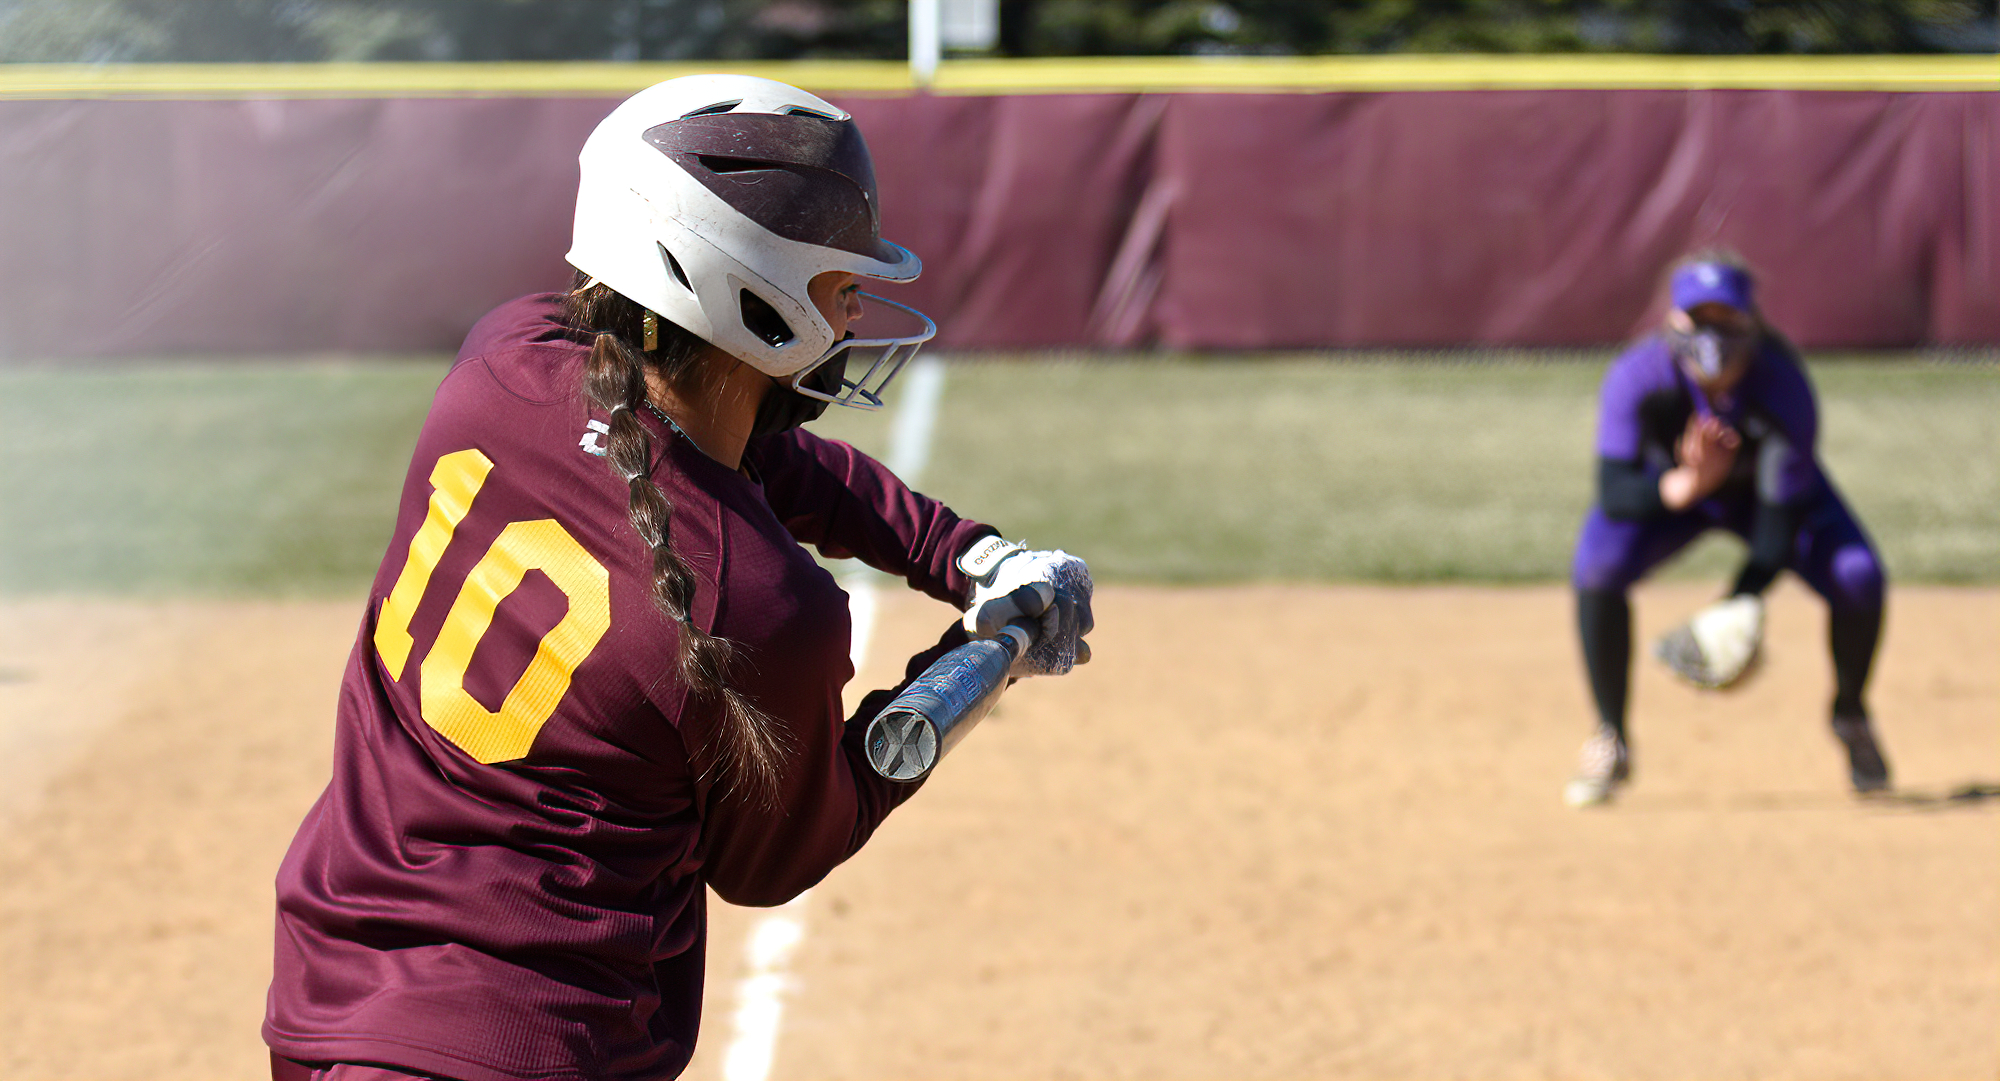 Senior Kenzie Leither went 2-for-4 in both games in the Cobbers' first two contests in Florida.